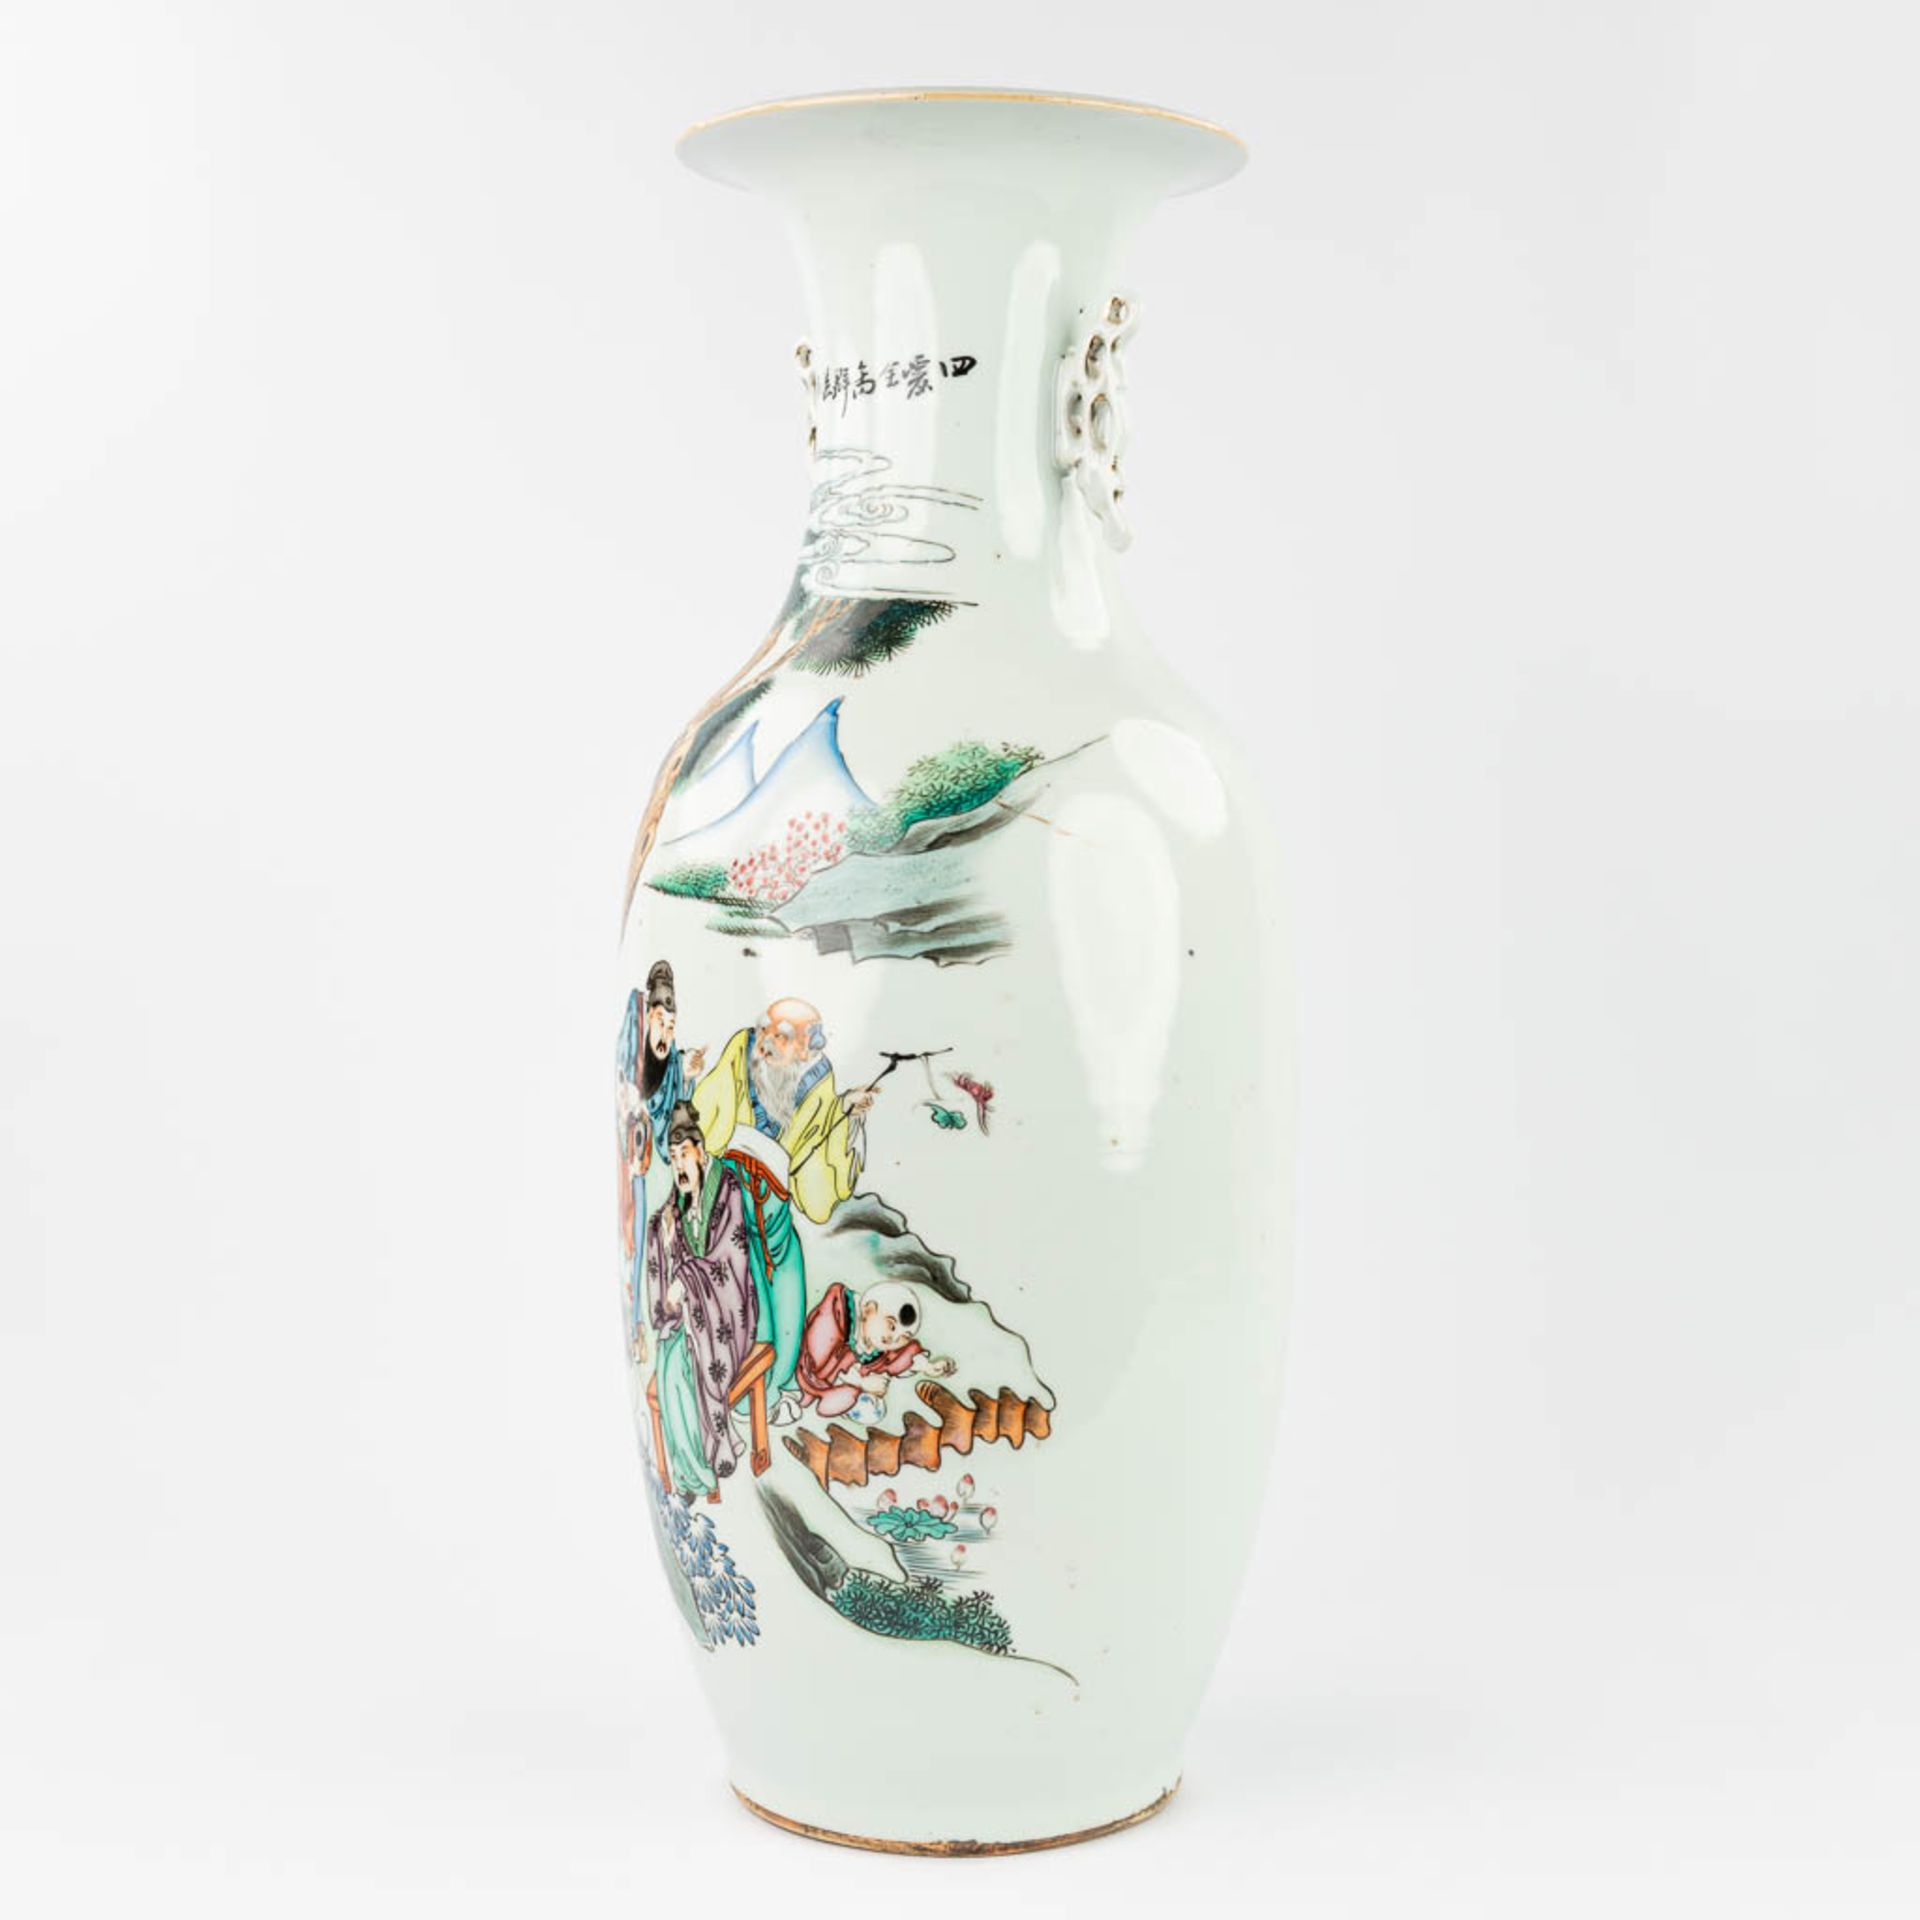 A Chinese vase made of porcelain and decorated with wise men in the garden. (59 x 23 cm) - Image 3 of 14